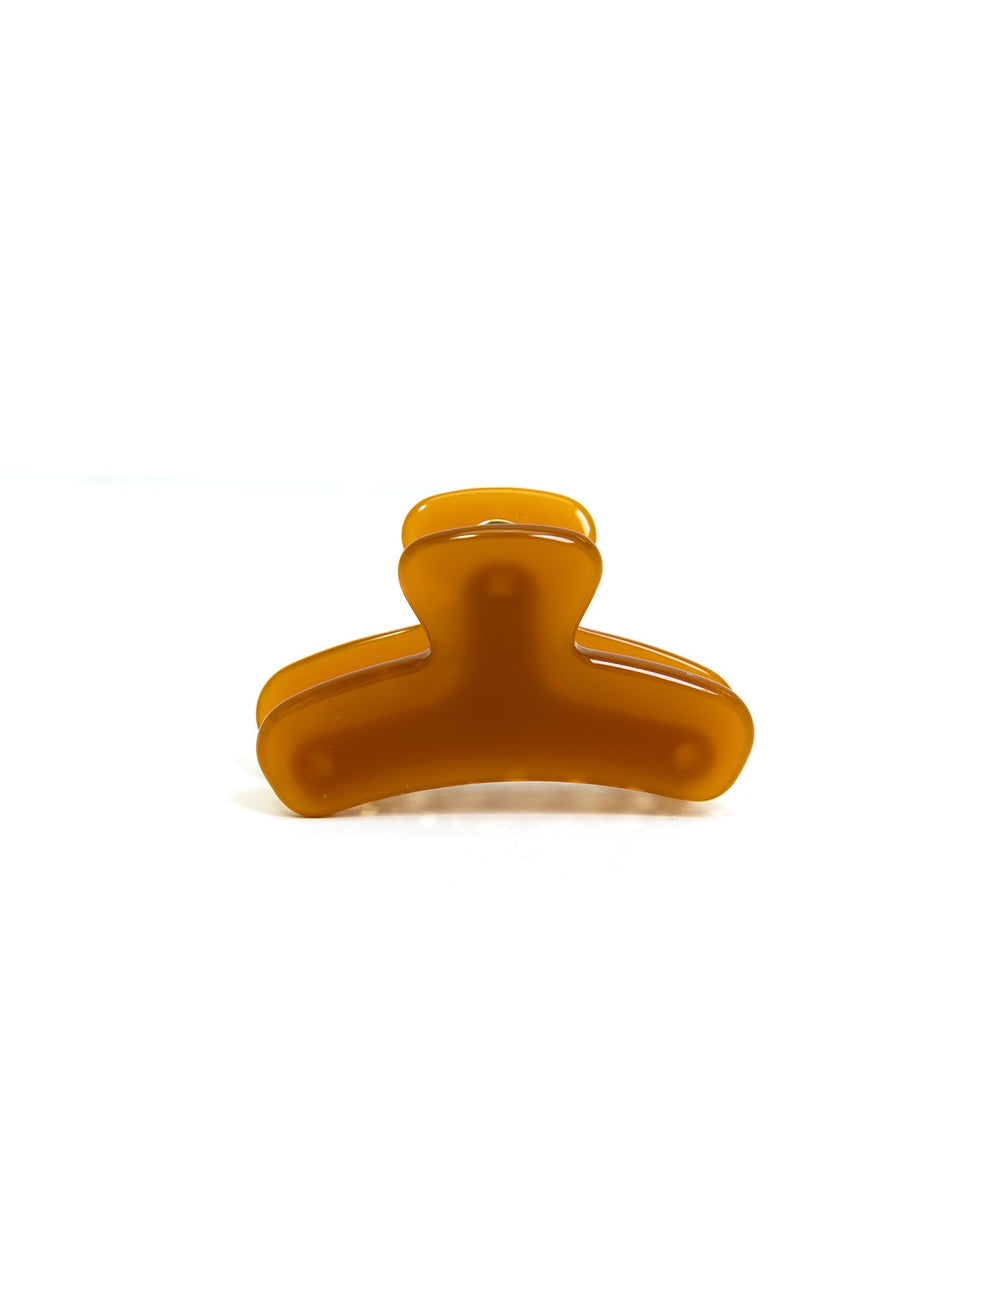 Alternative view of Fenna & Fei's mini french claw in amber.